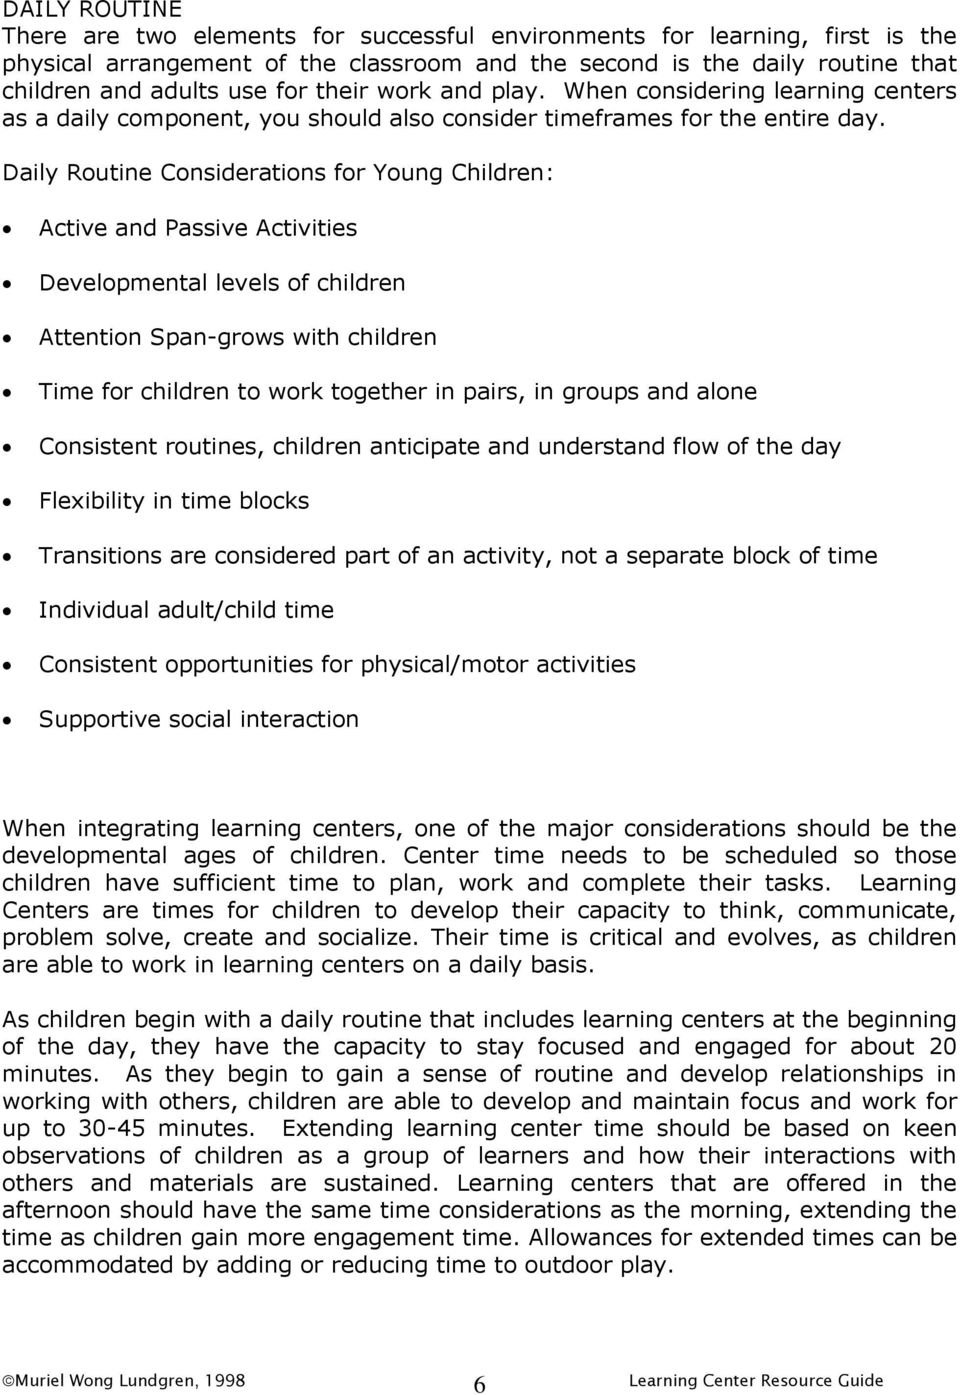 Daily Routine Considerations for Young Children: Active and Passive Activities Developmental levels of children Attention Span-grows with children Time for children to work together in pairs, in